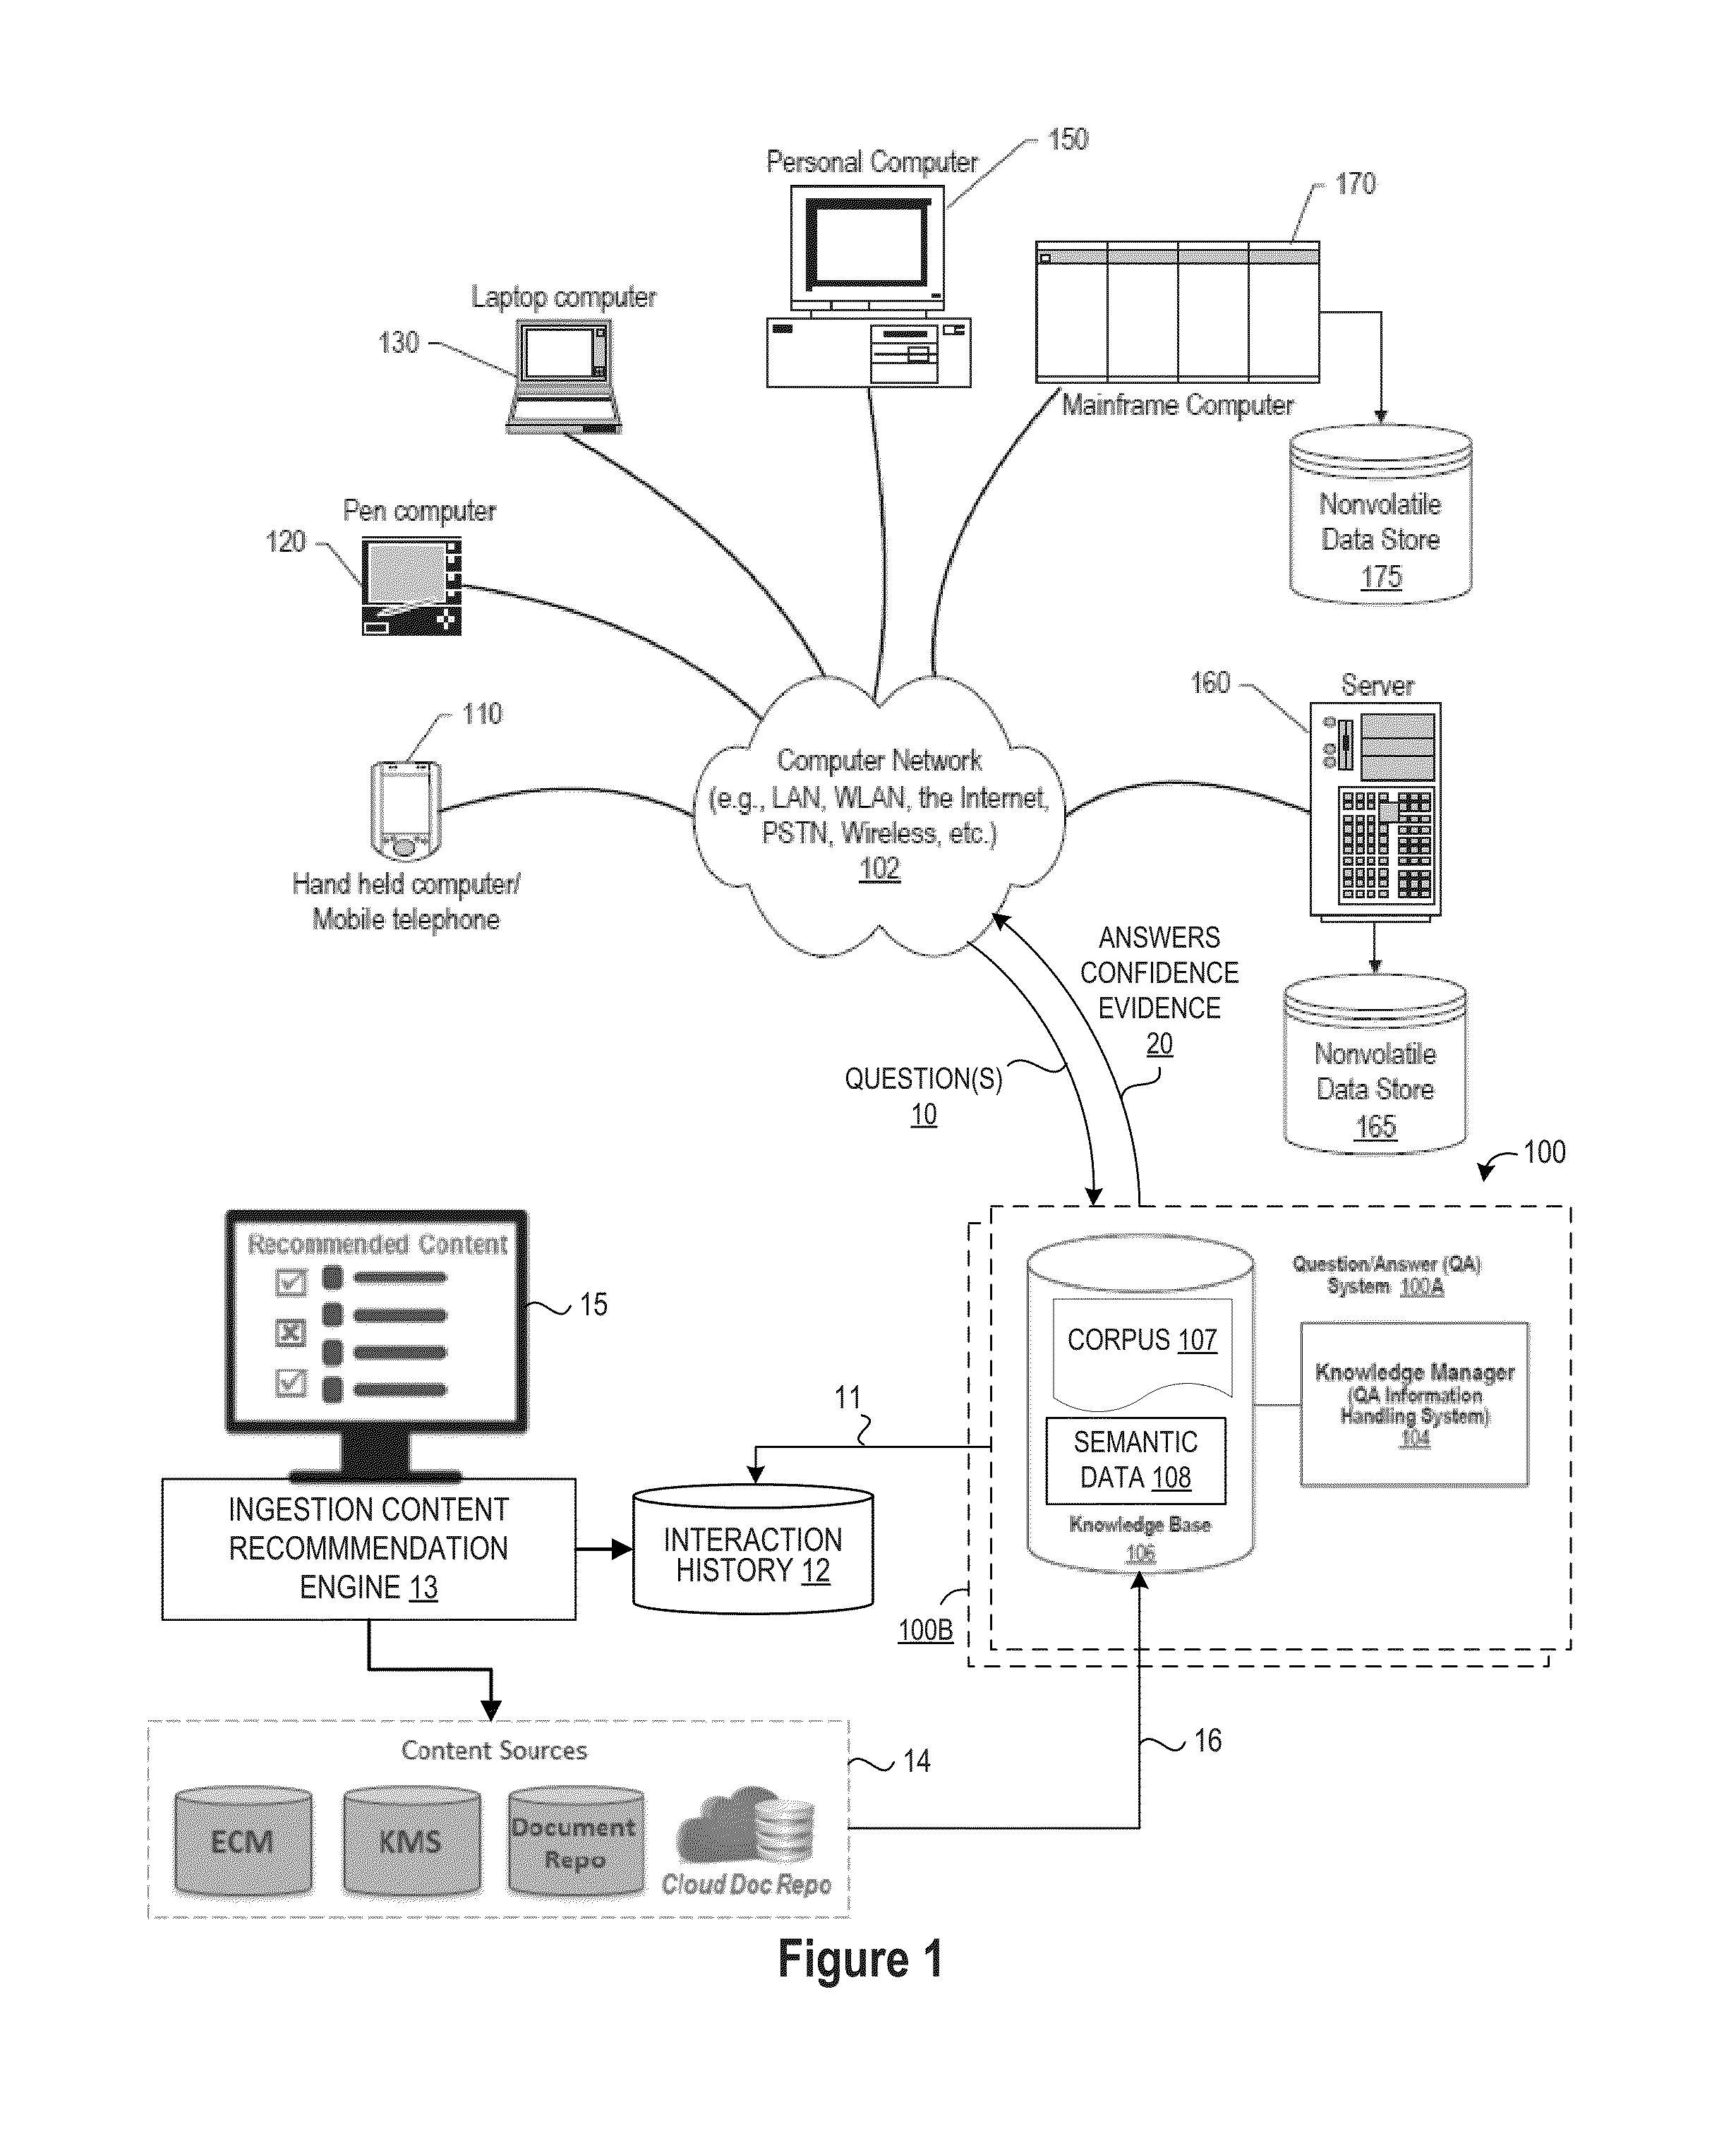 Method for Recommending Content to Ingest as Corpora Based on Interaction History in Natural Language Question and Answering Systems